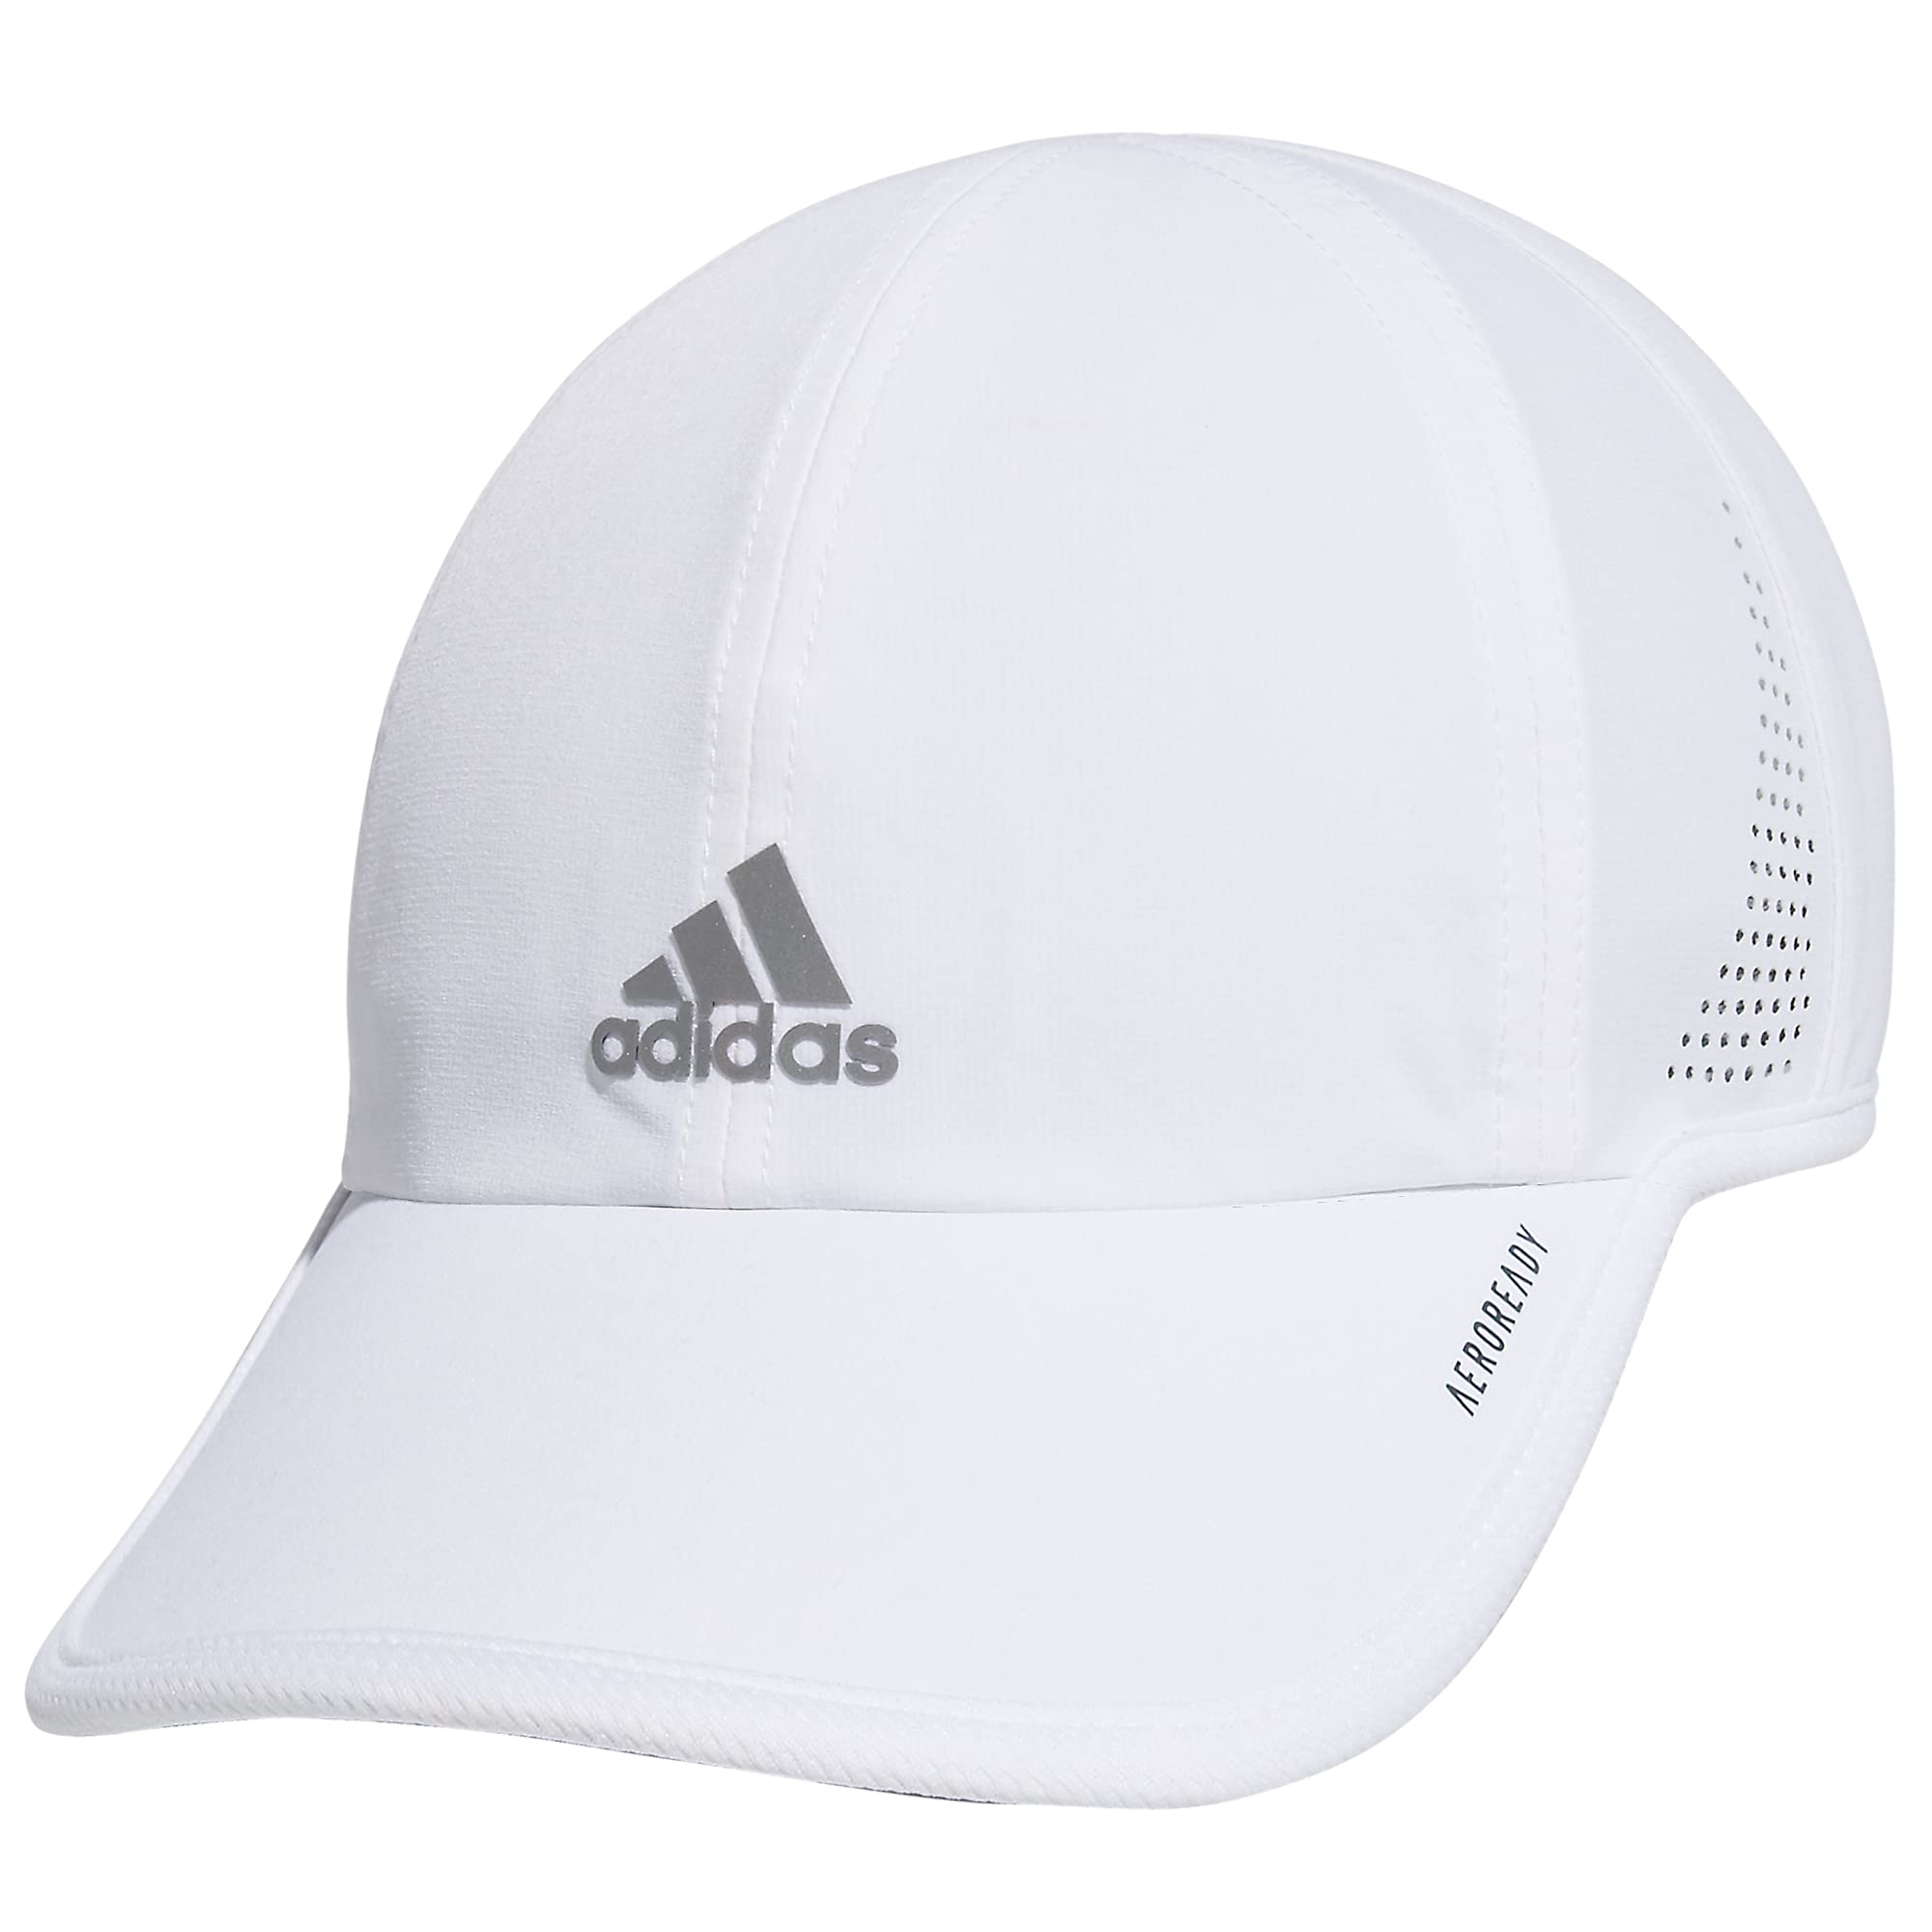 adidas Women's Superlite Relaxed Fit Performance Hat (White/Silver Reflective) $12.70 + Free Shipping w/ Prime or on $25+